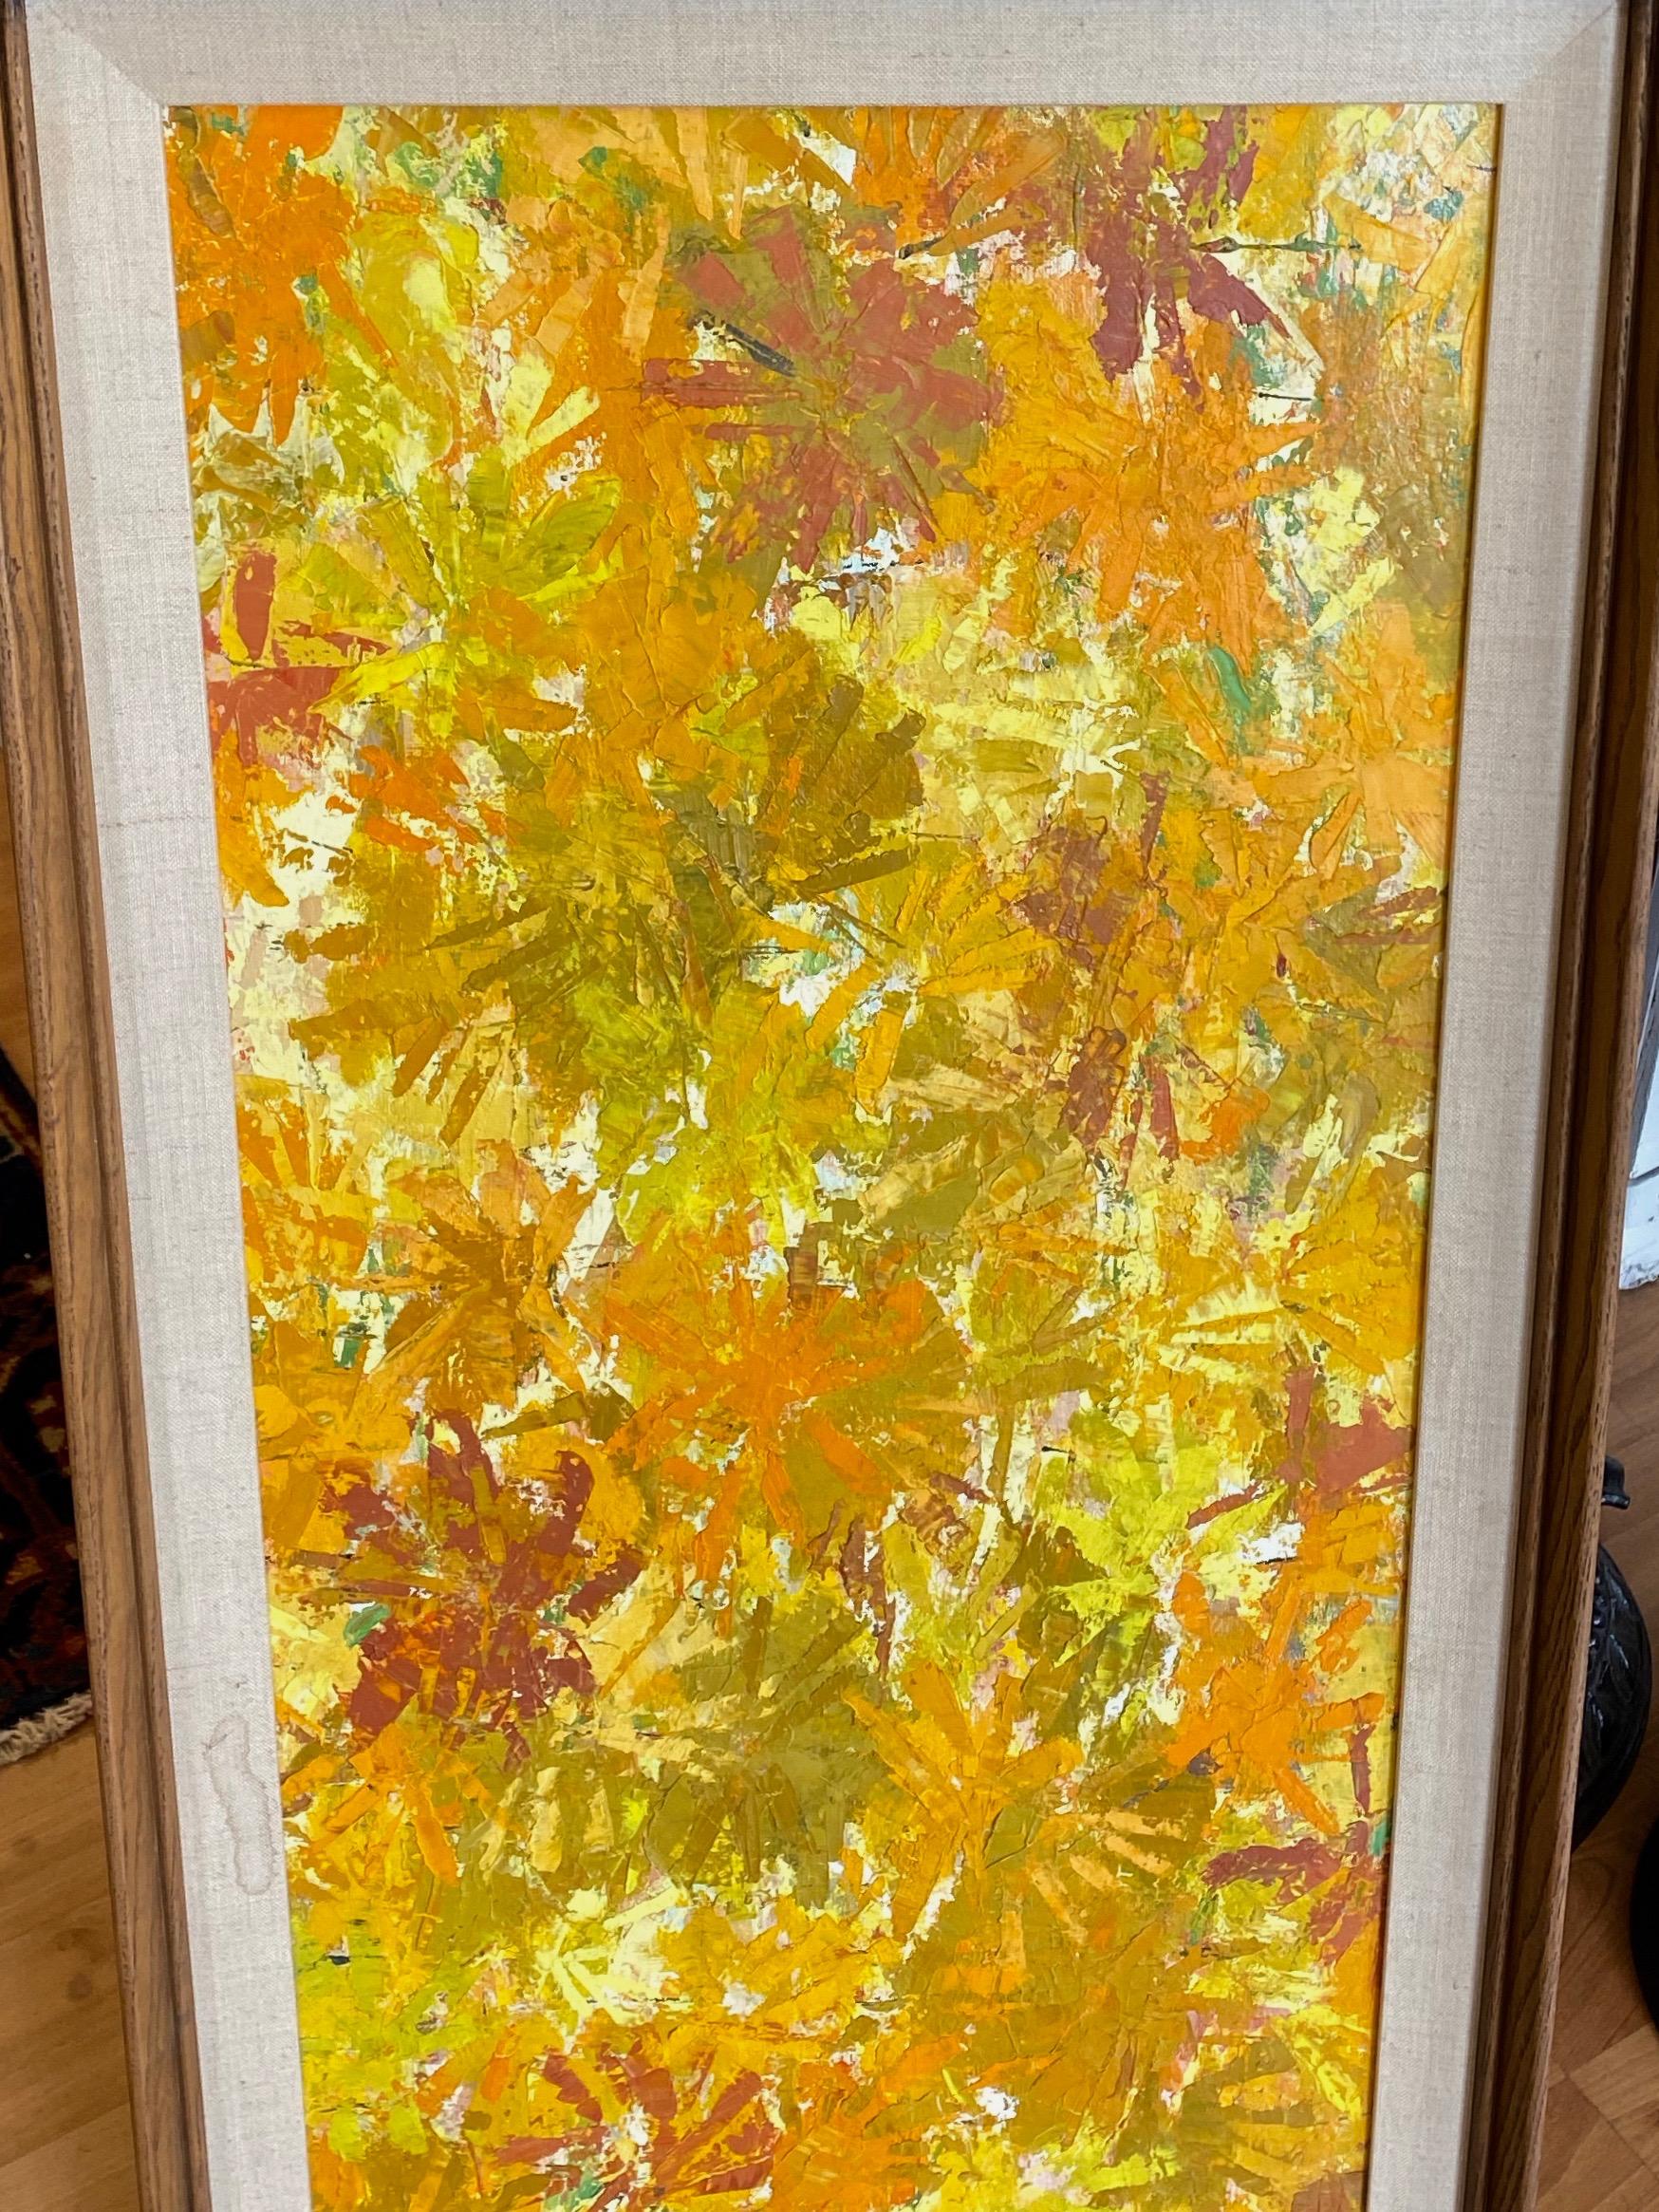 Helena Willi “Autumn”, Expressionist Flora Oil Painting, c. 1960 9